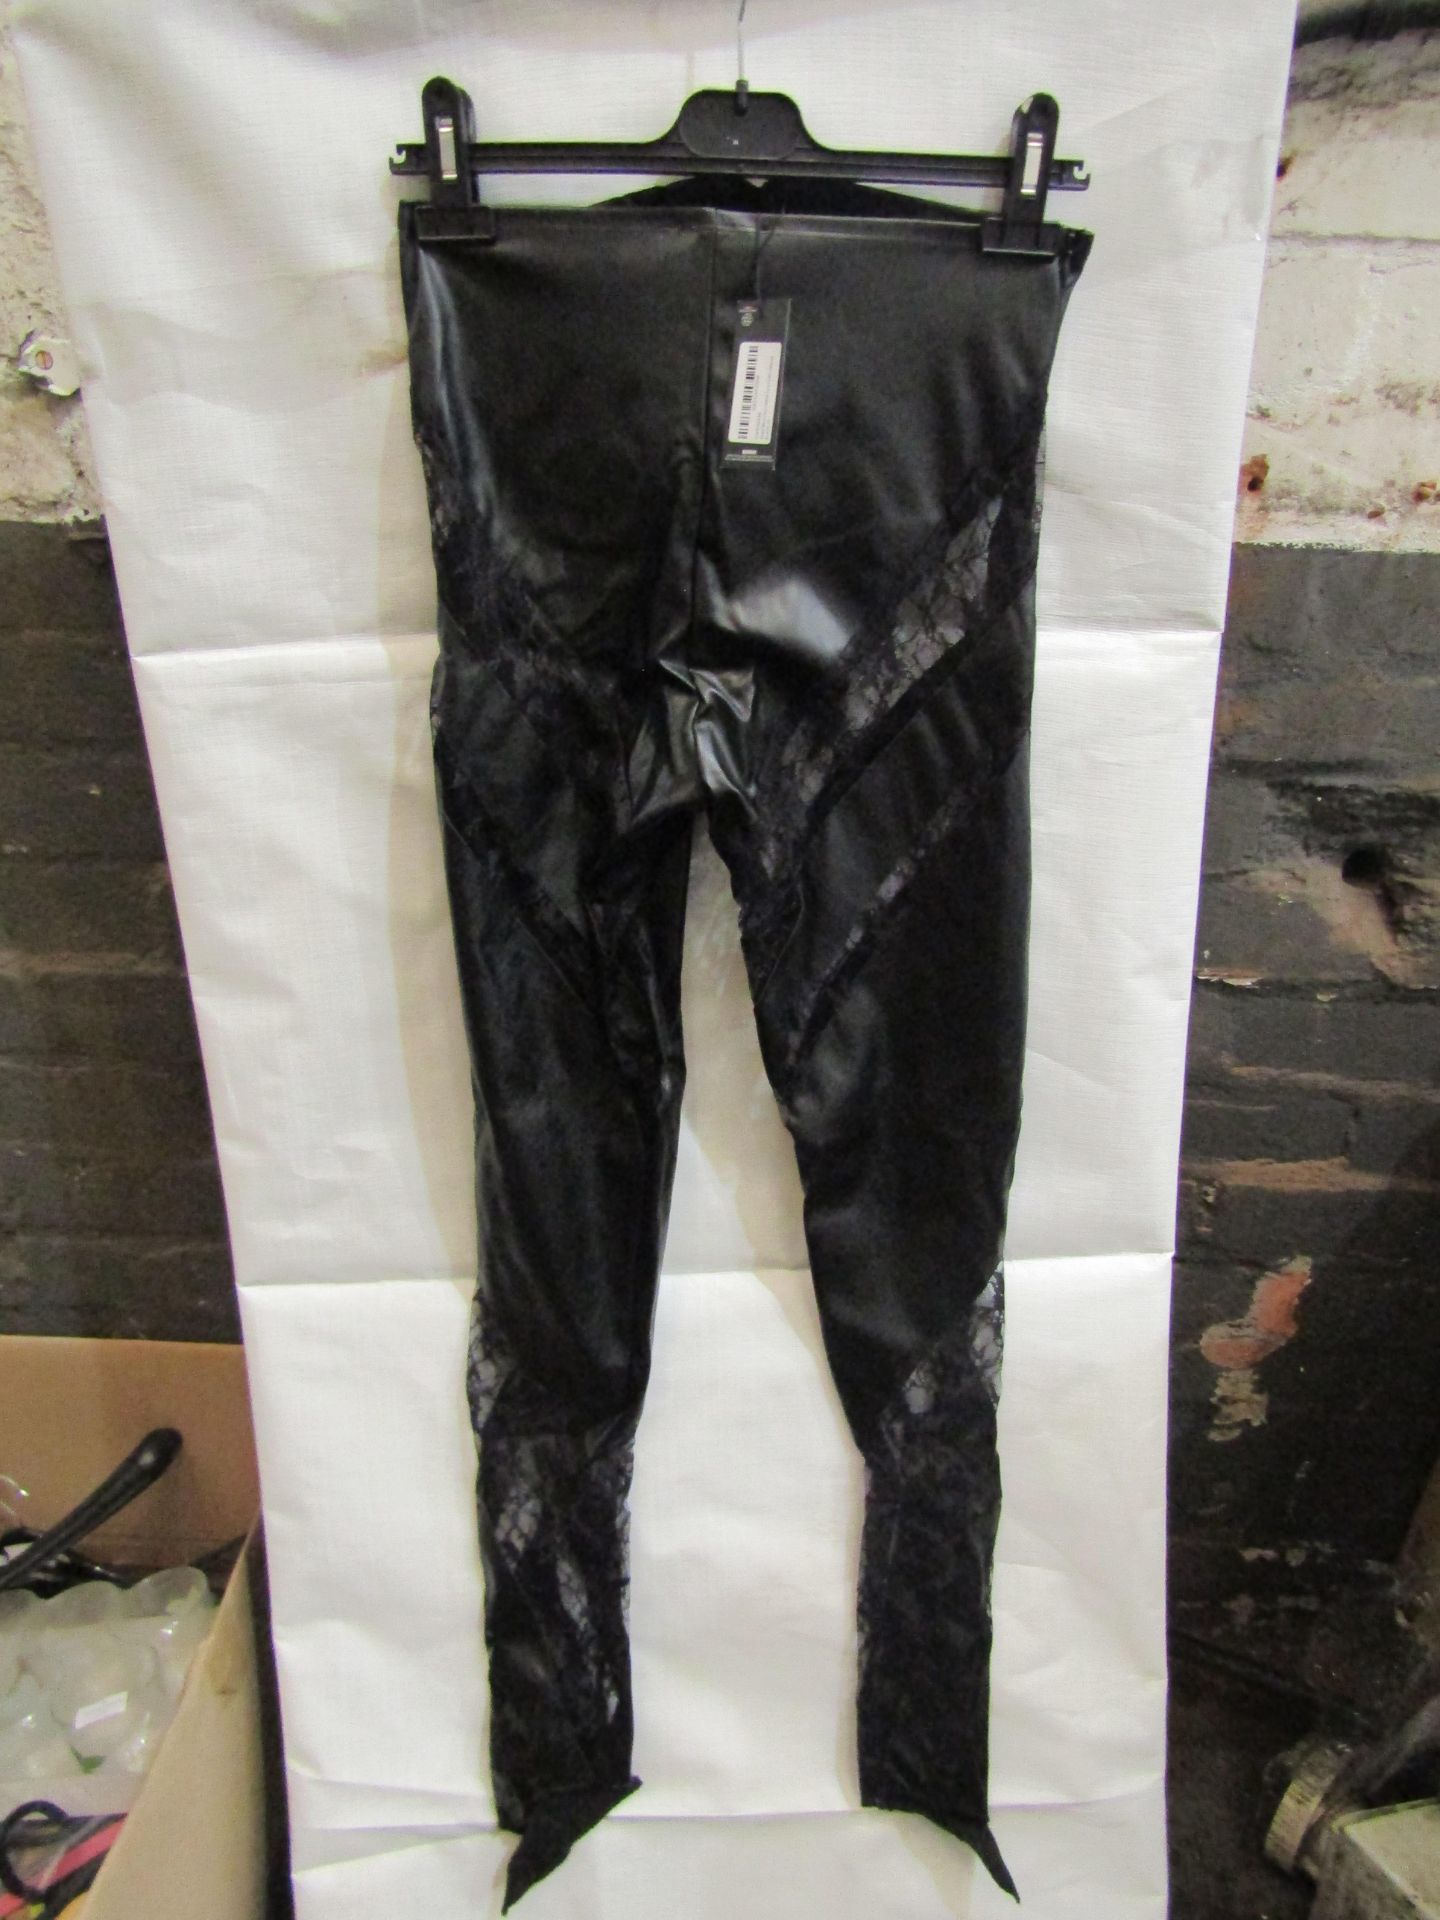 5x PrettyLittleThing Shape Black Faux Leather Insert Leggings, Size: 6 - New & Packaged.